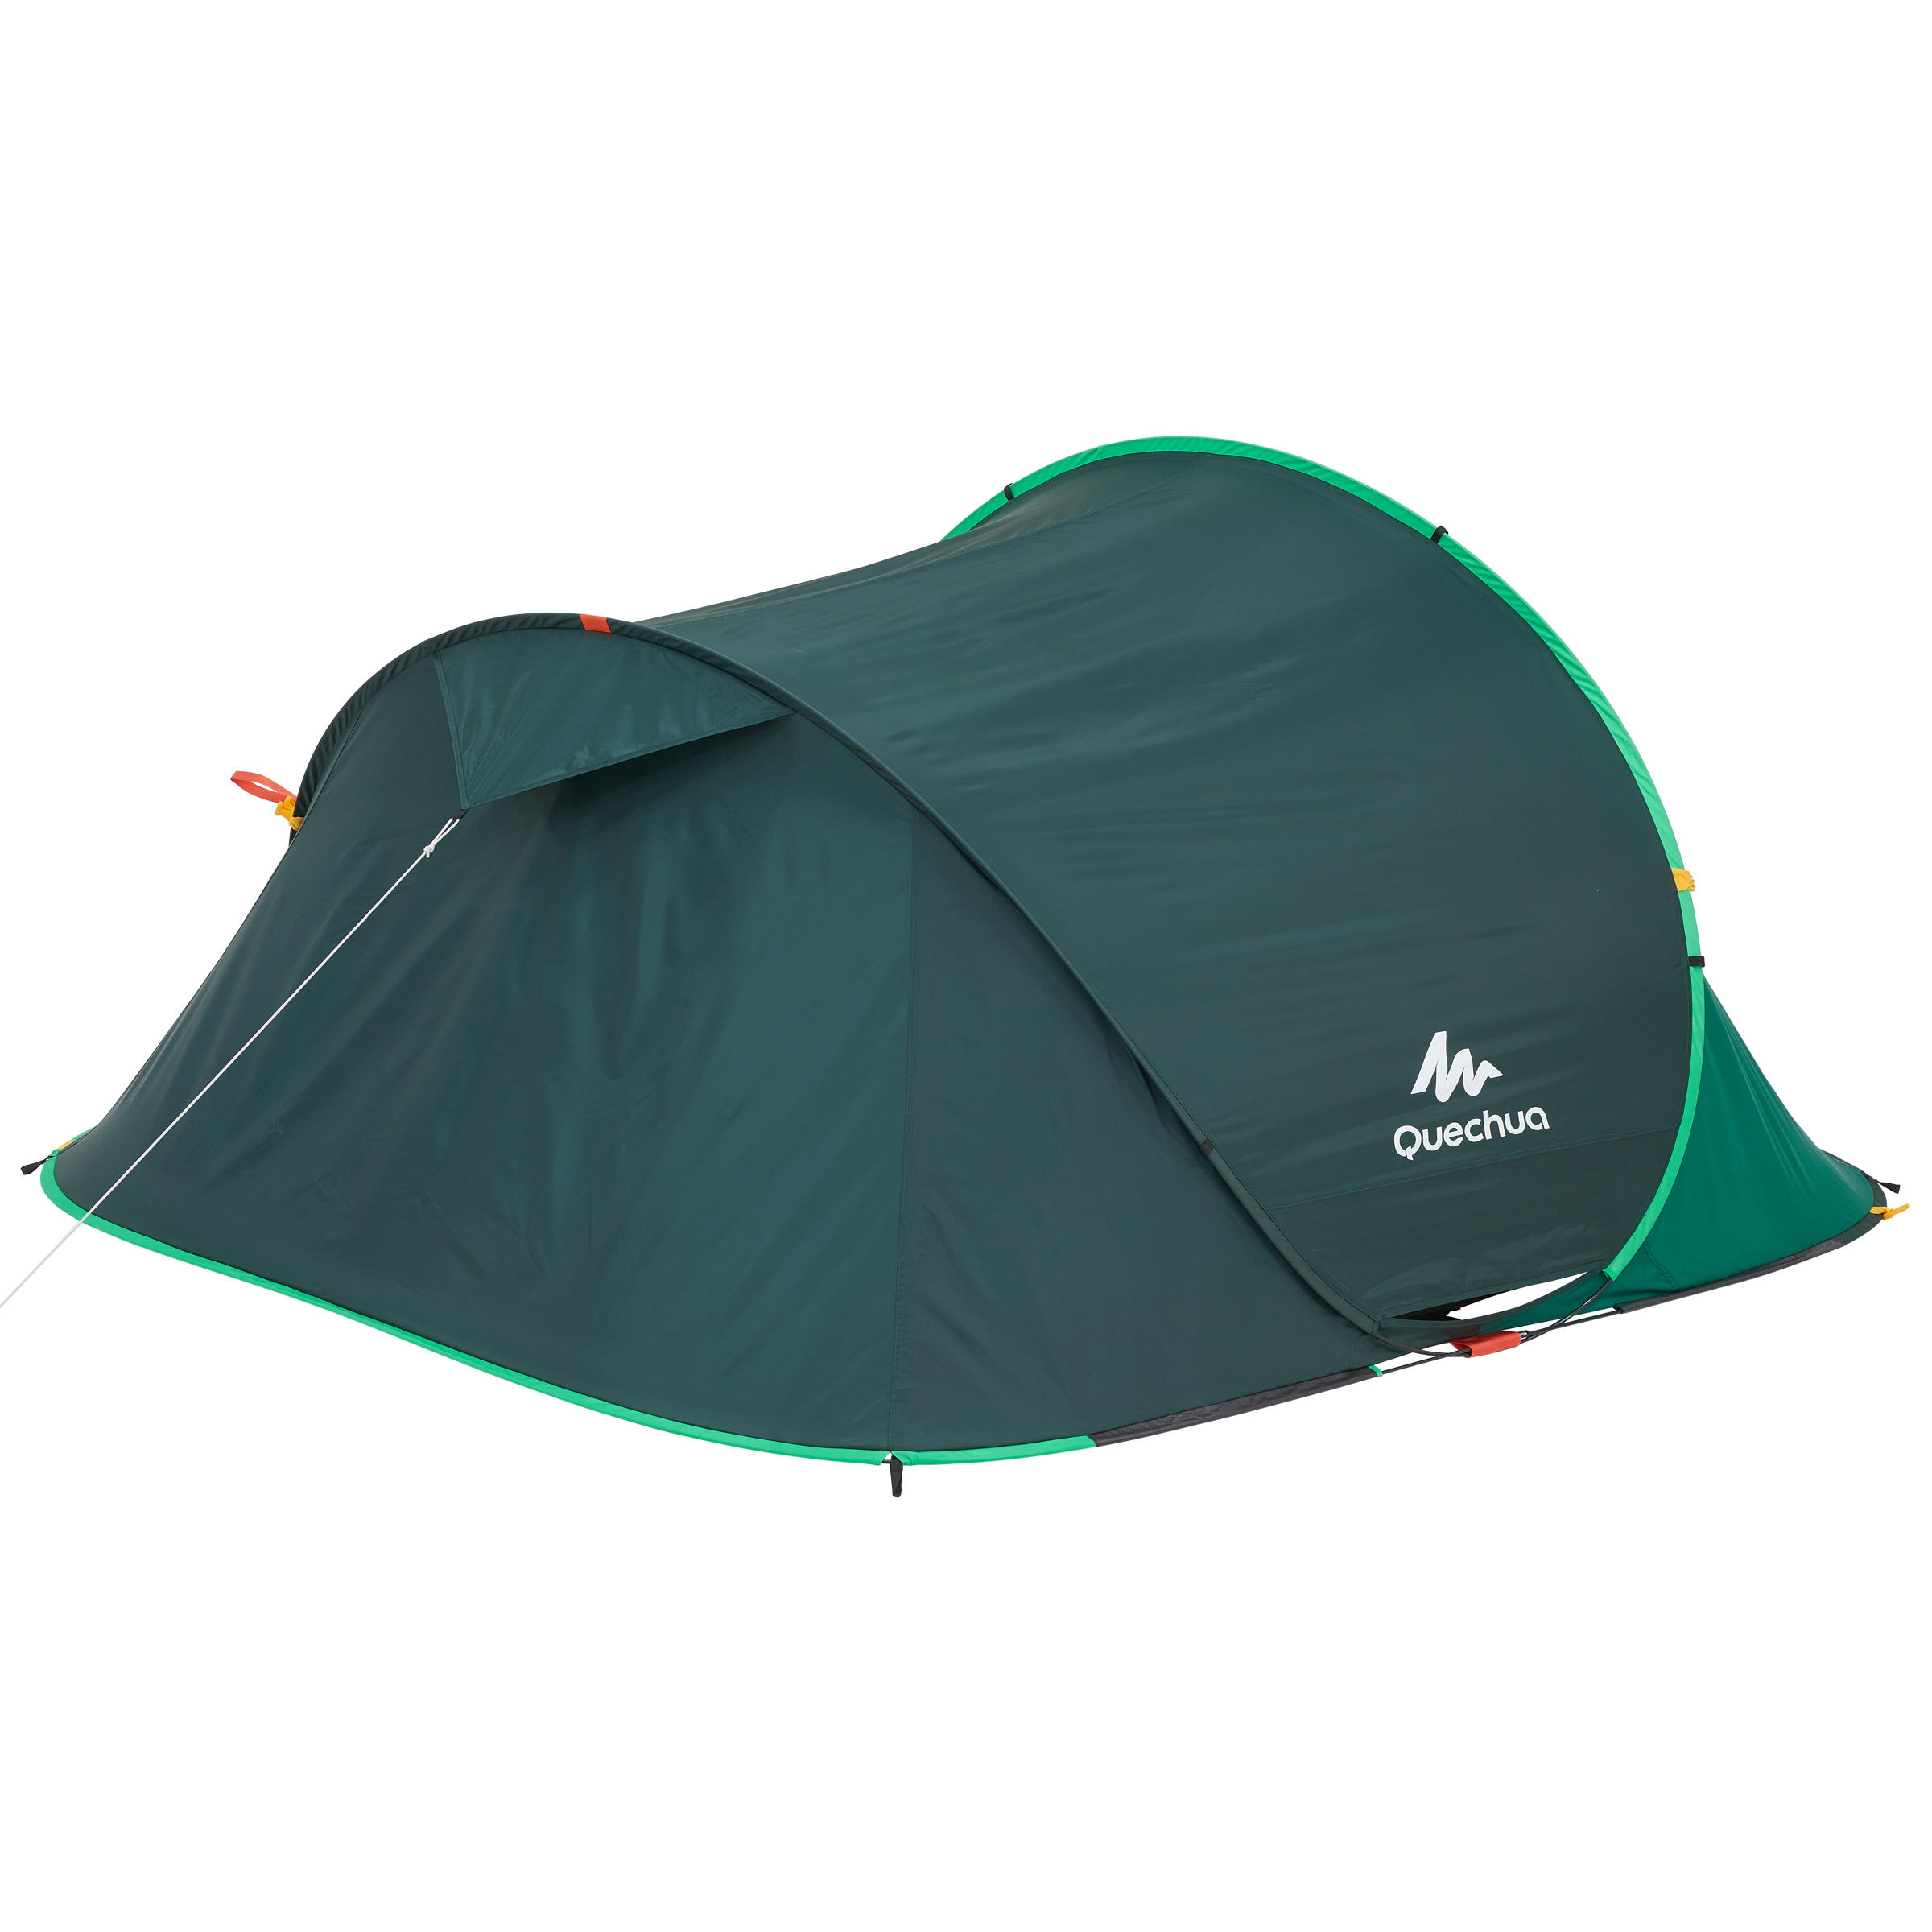 2 SECOND III Easy Flysheet and Tent Poles 3/4